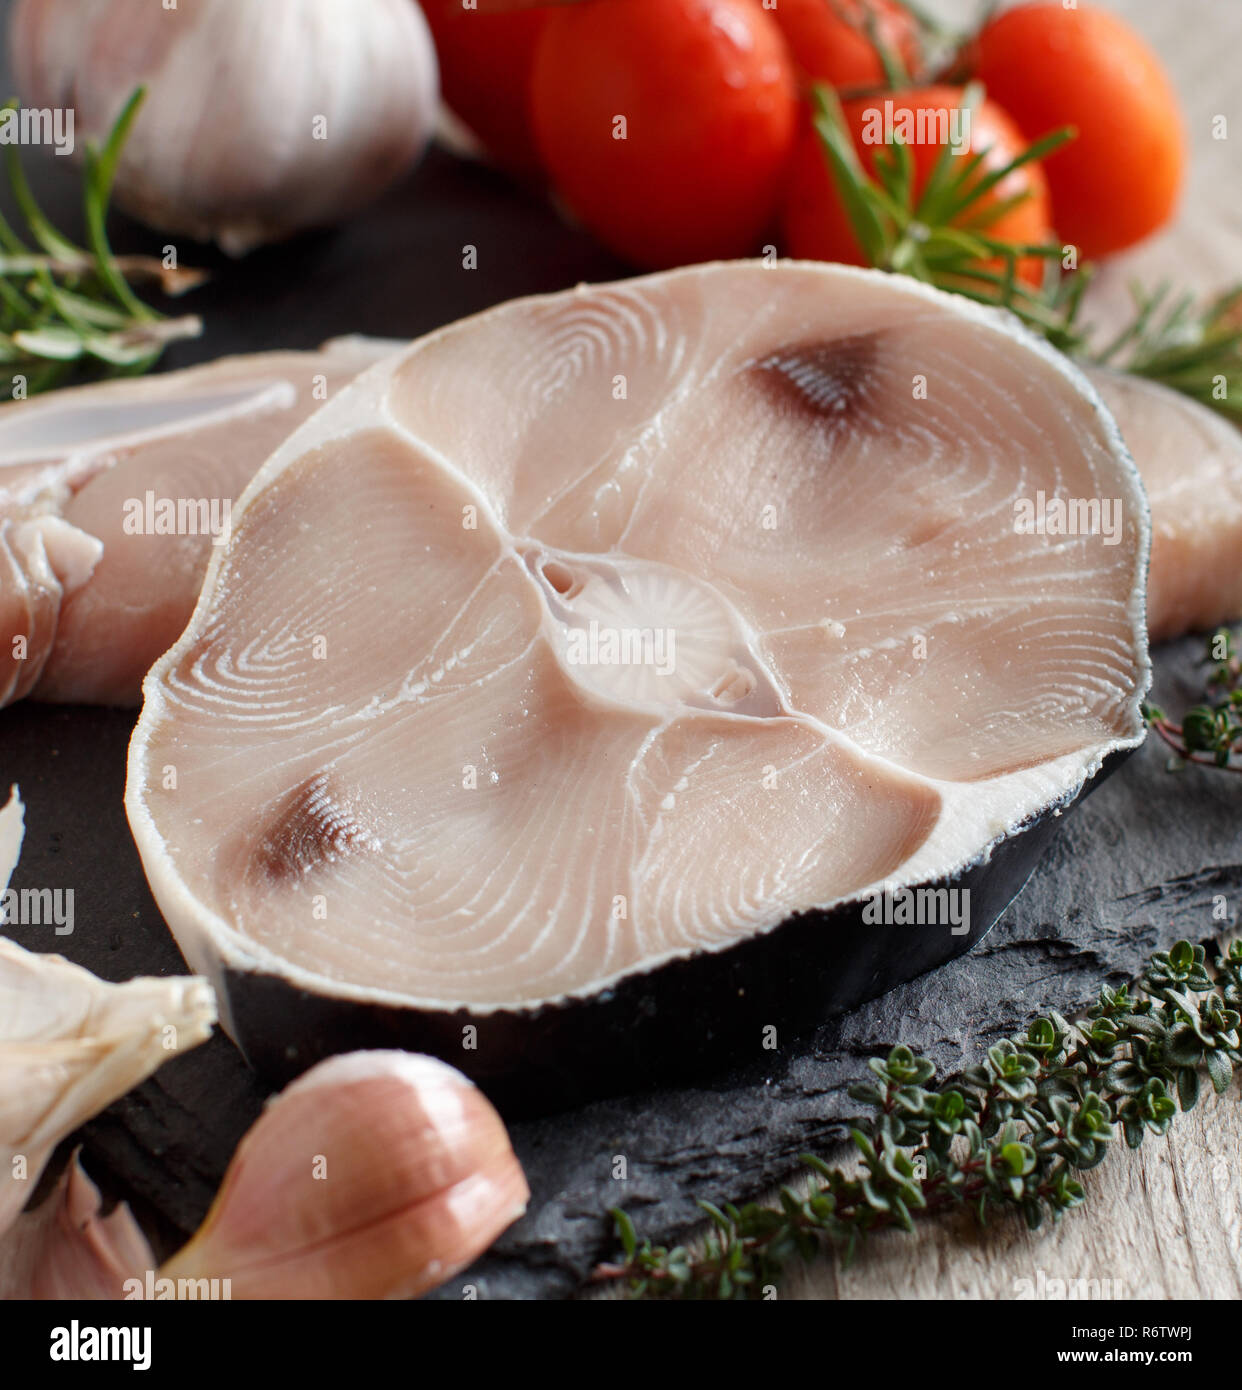 Two shark steak with vegetables and herbs Stock Photo